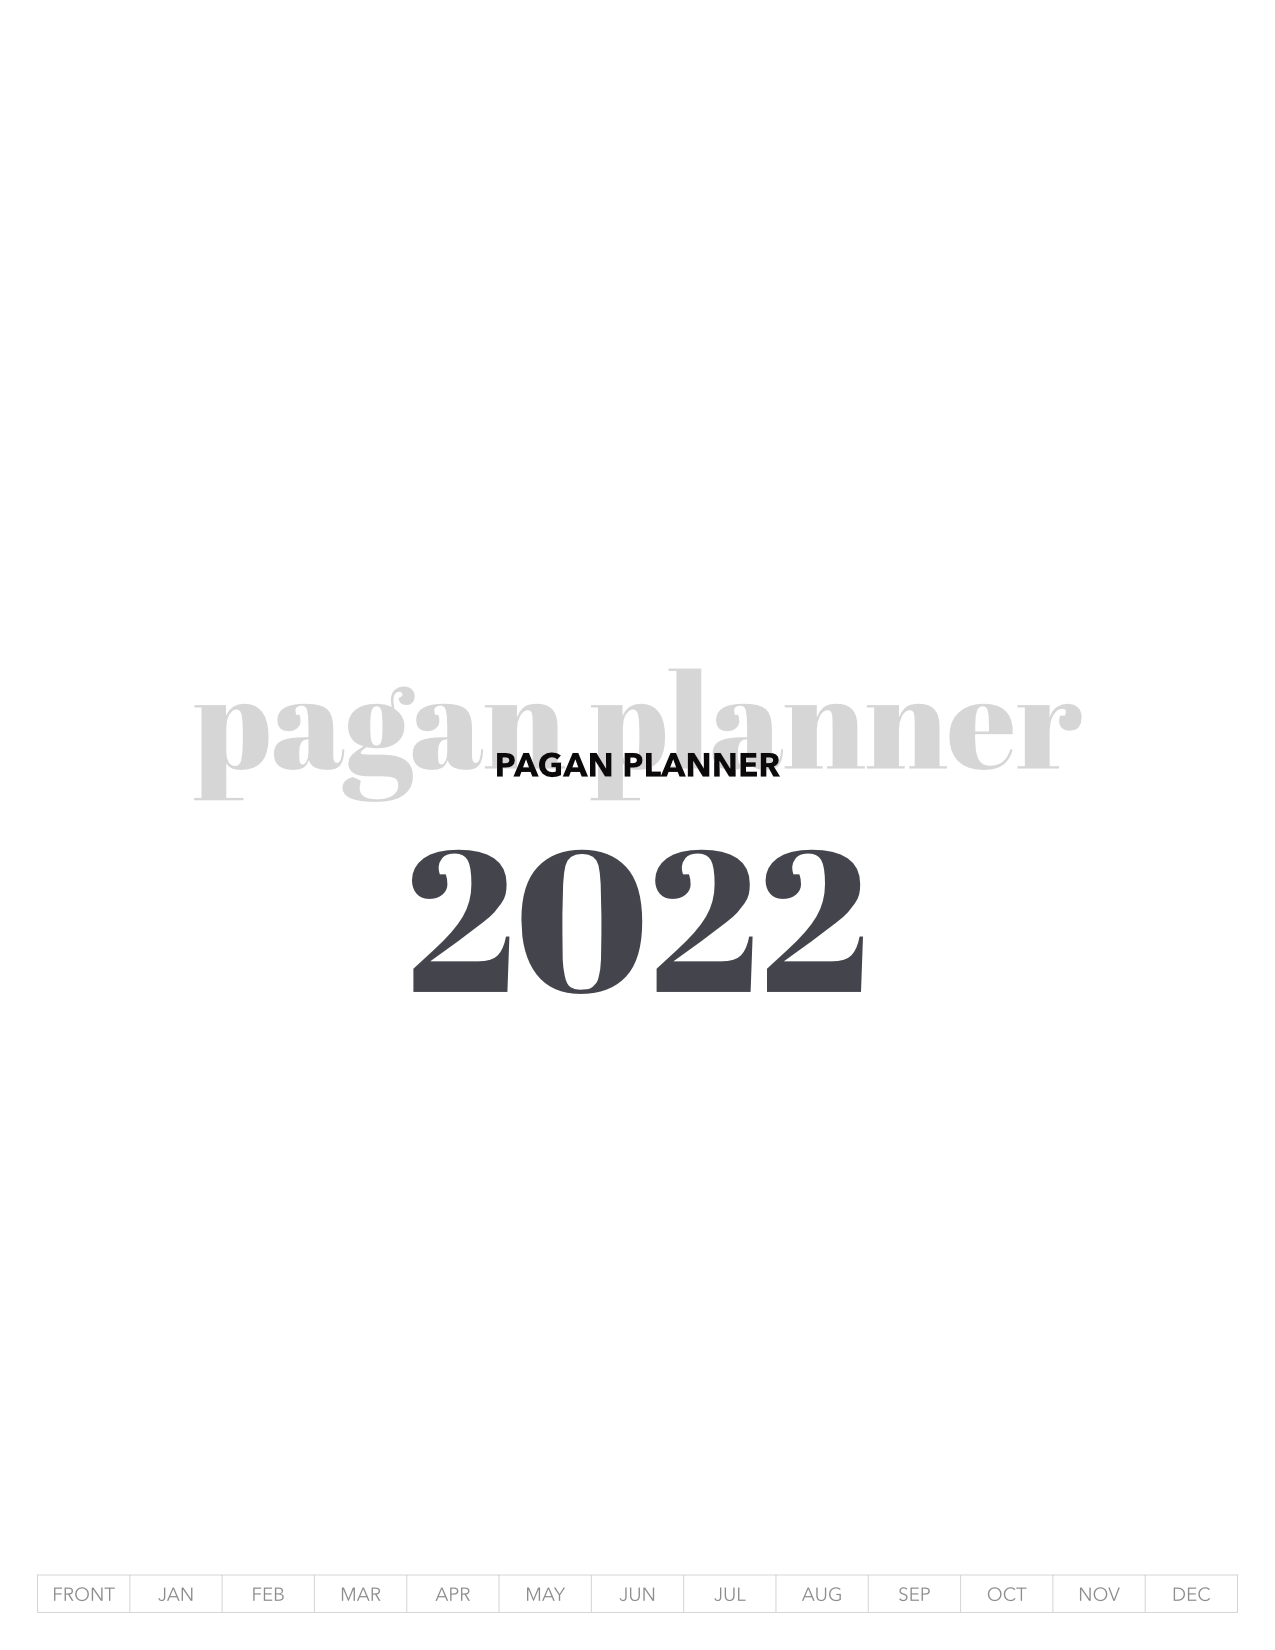 the 2022 planner is here!